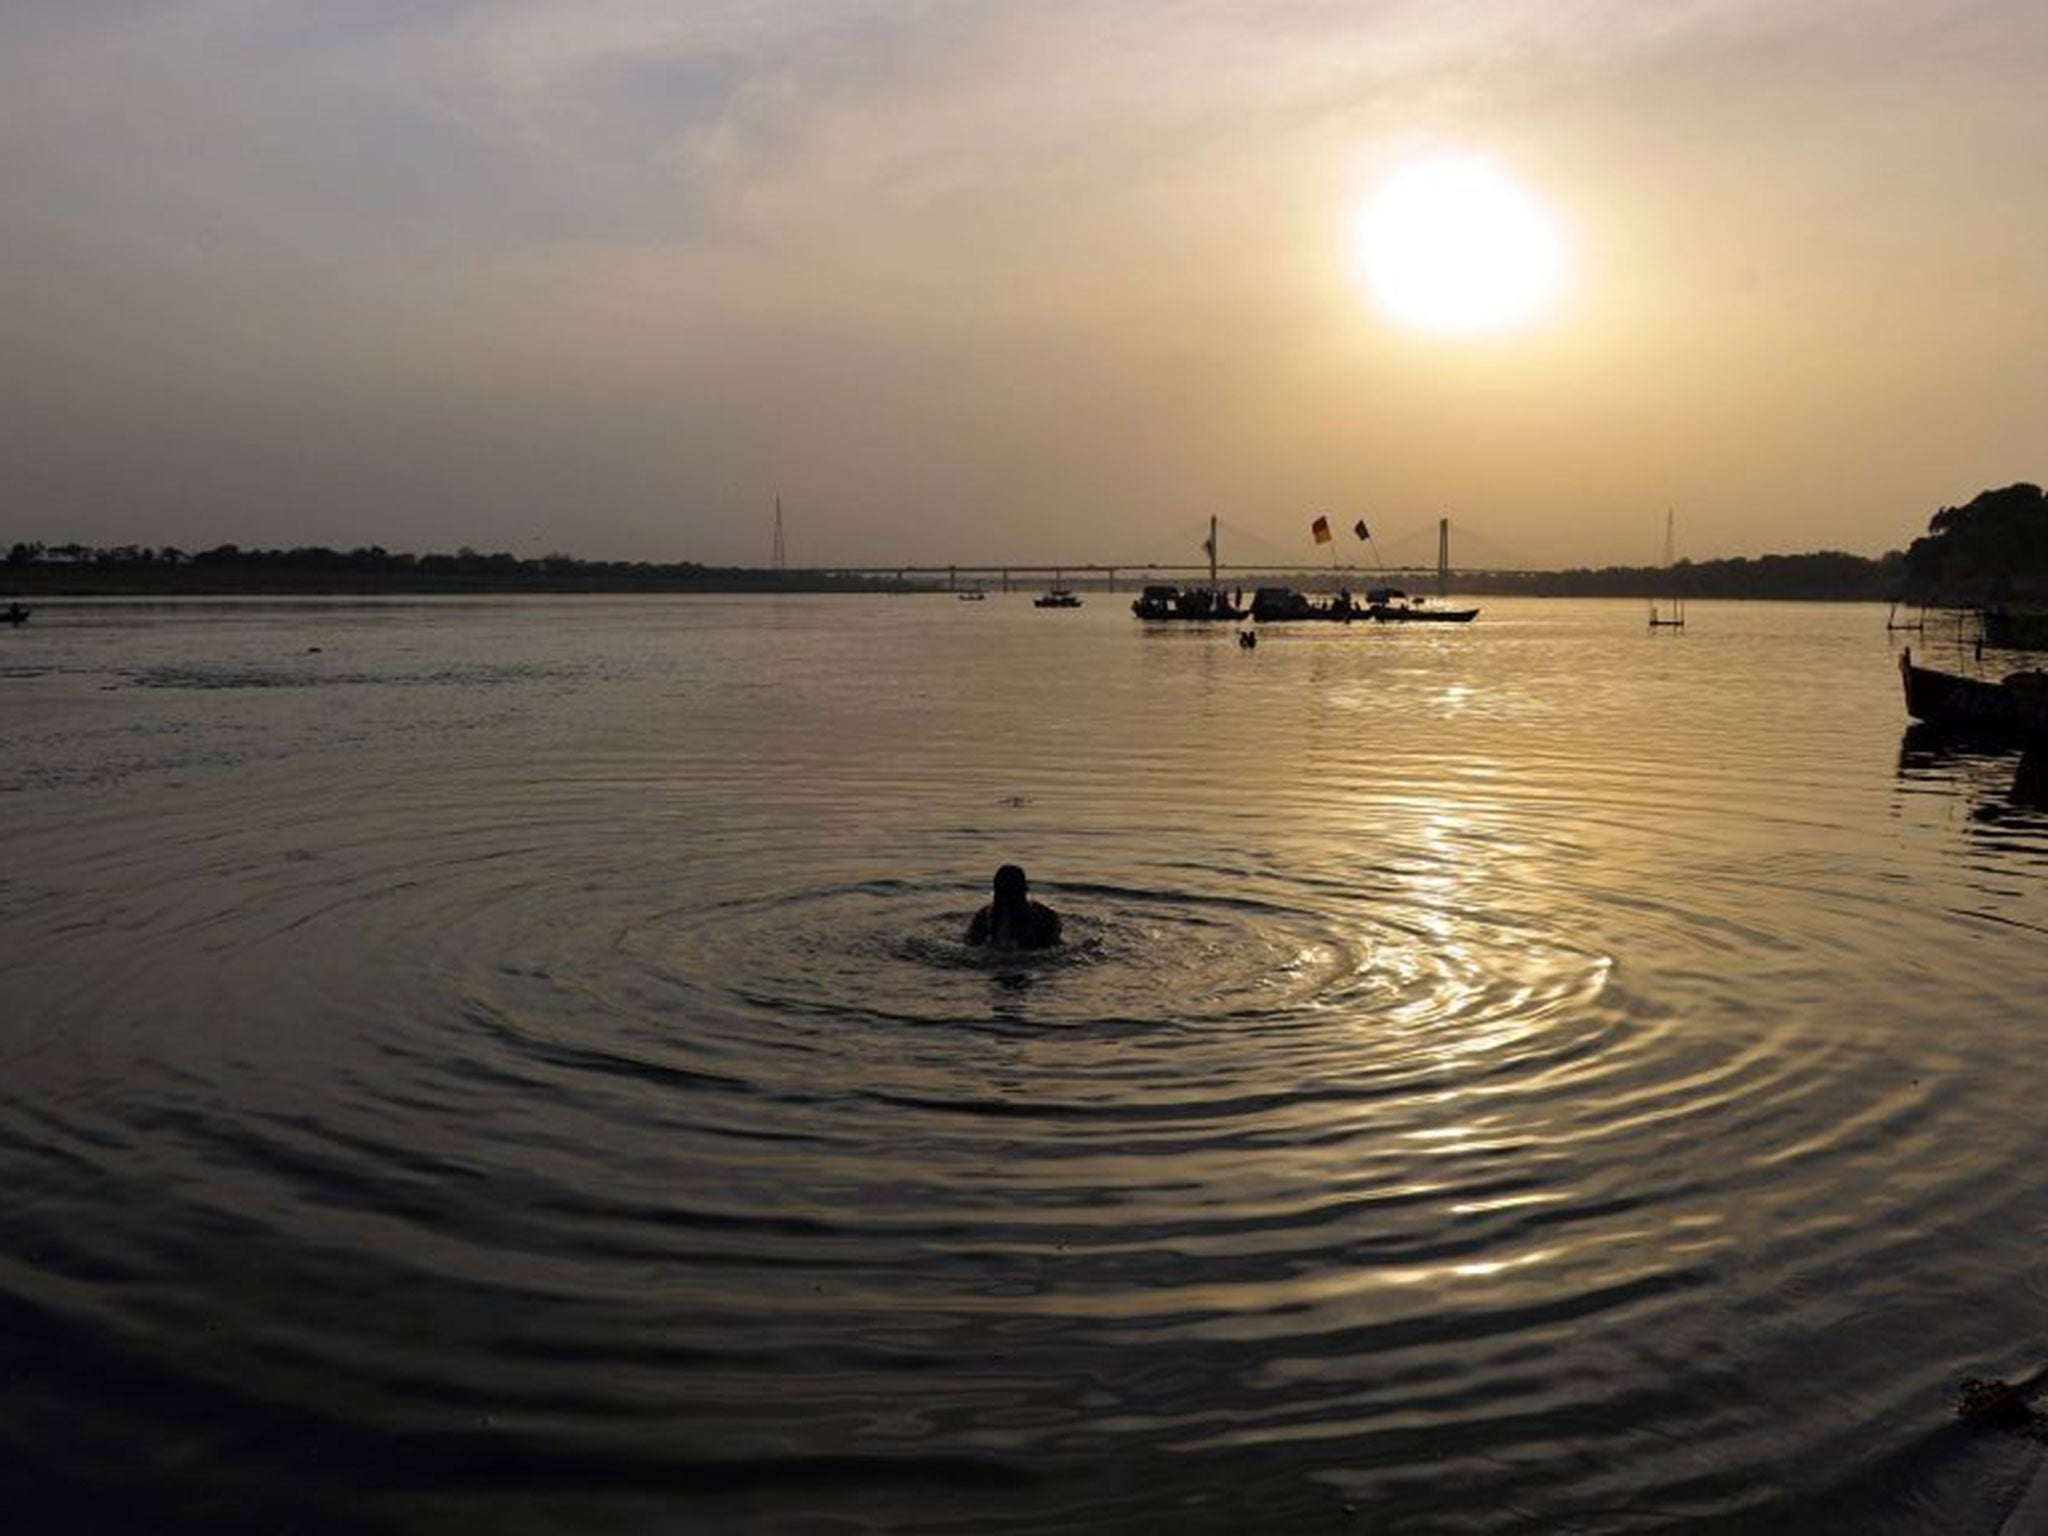 The confluence of the Ganges, Yamuna and mythical Saraswati in Allahabad